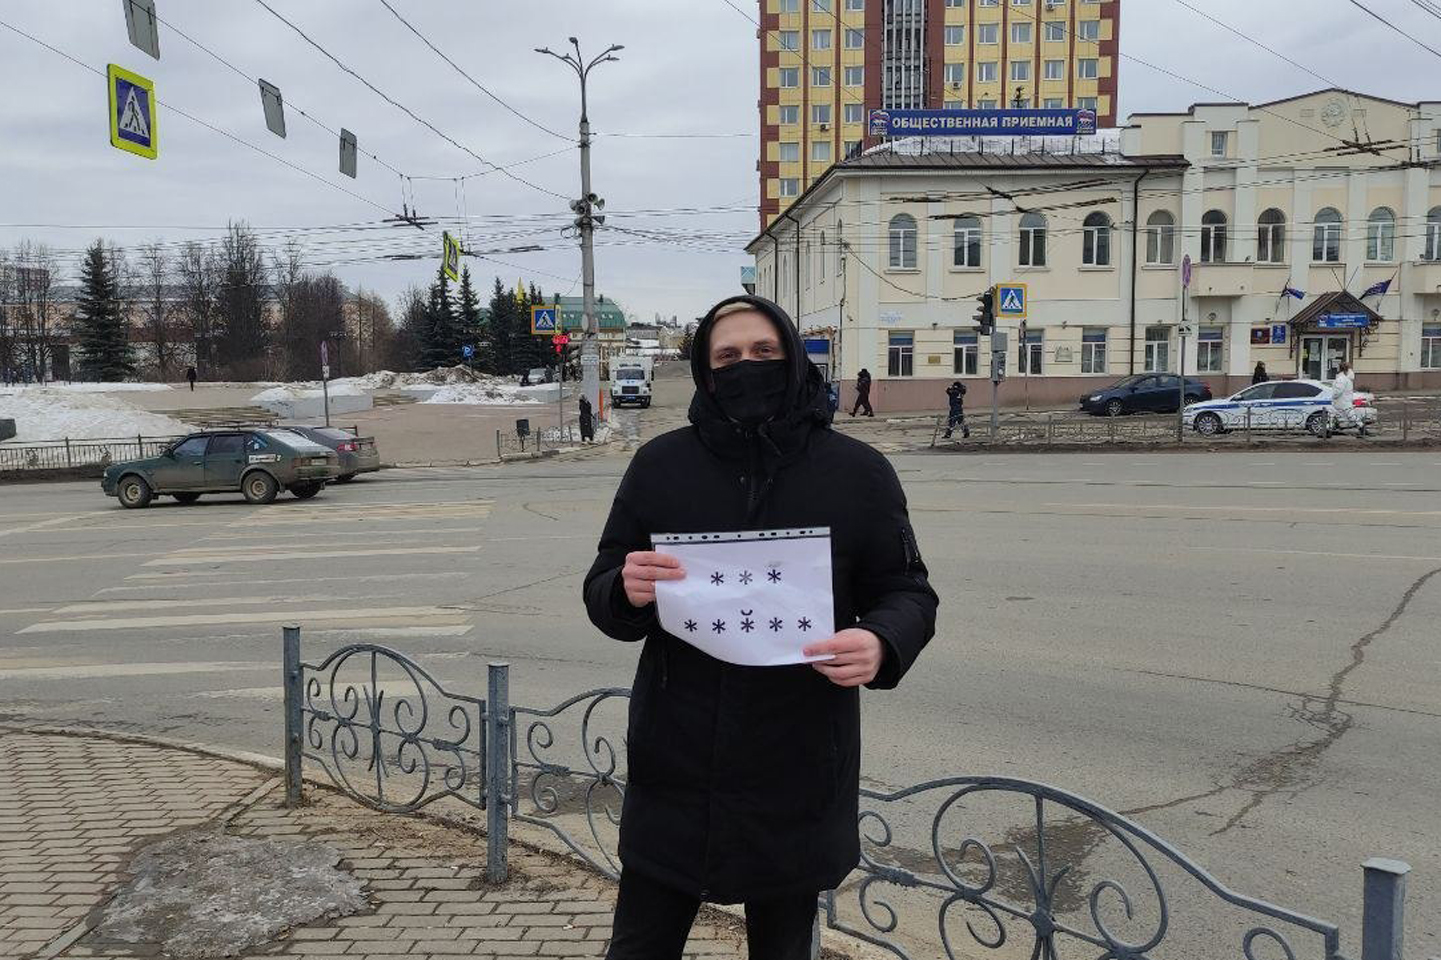 A picketer in Ivanovo, March 12, 2022 / Photo provided by the detainee himself